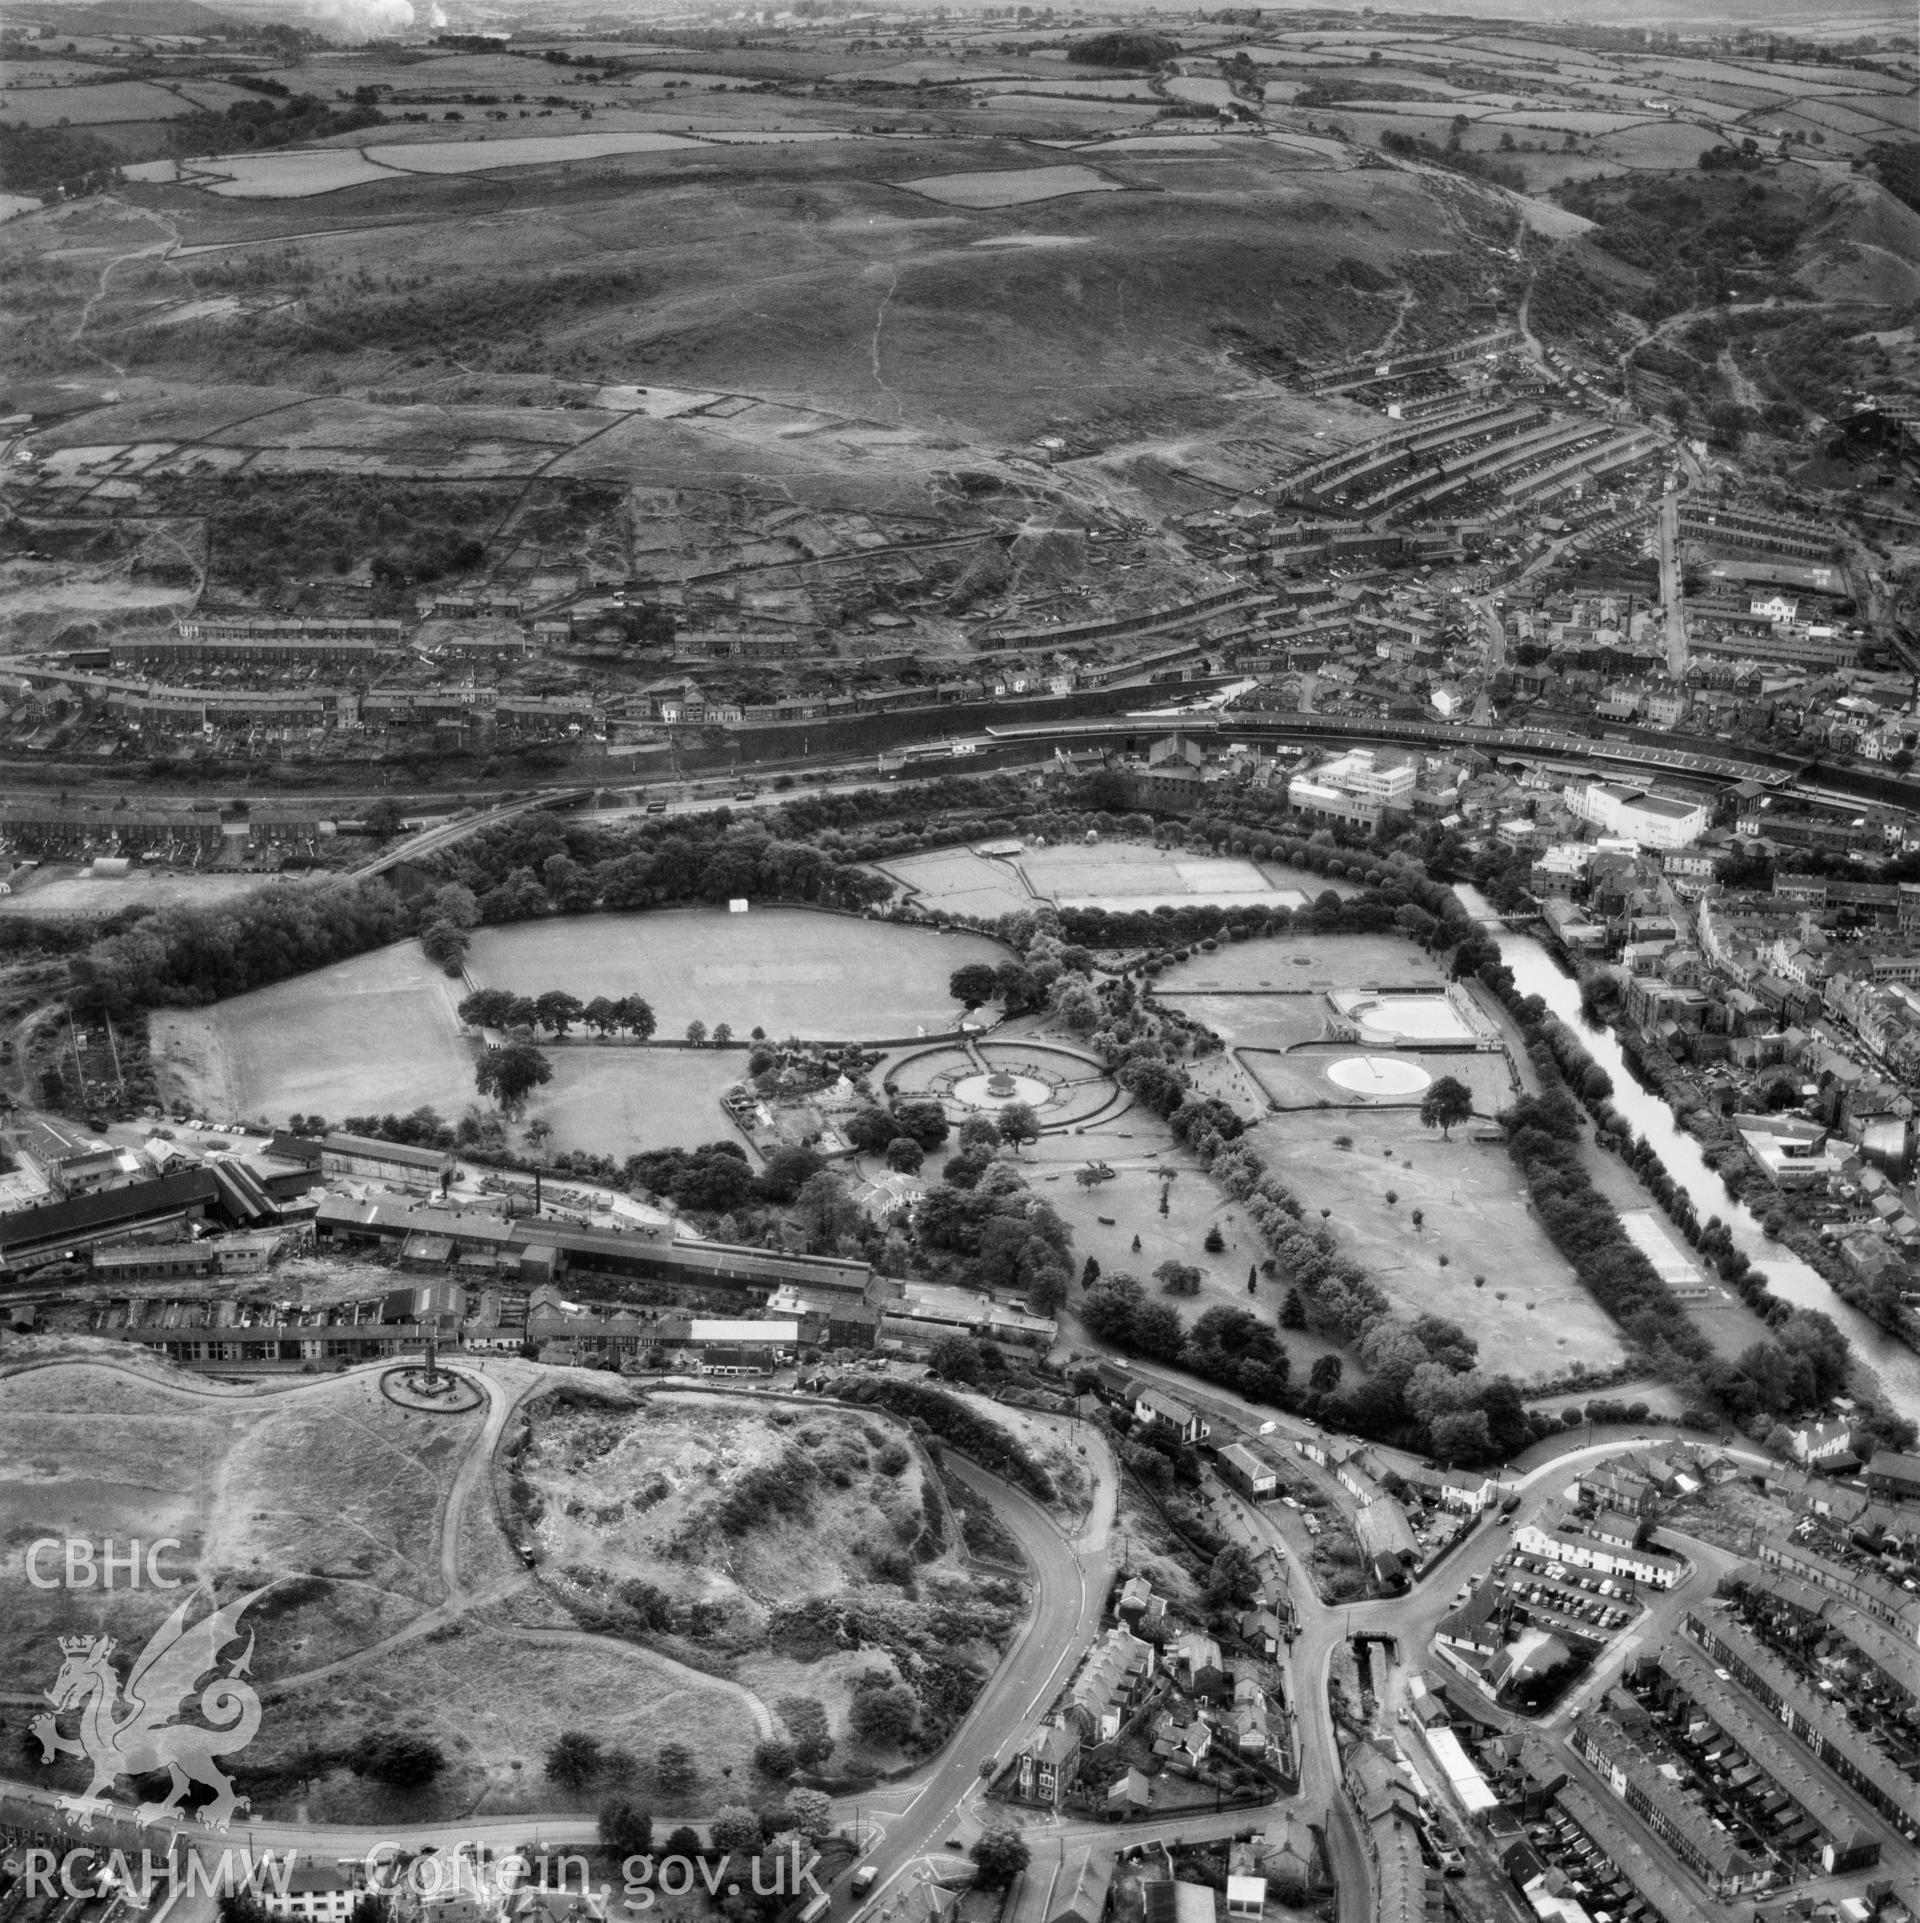 Digital copy of a black and white oblique aerial photograph showing Ynysangharad Park, Pontypridd, taken by Aerofilms Ltd and dated September 1959.